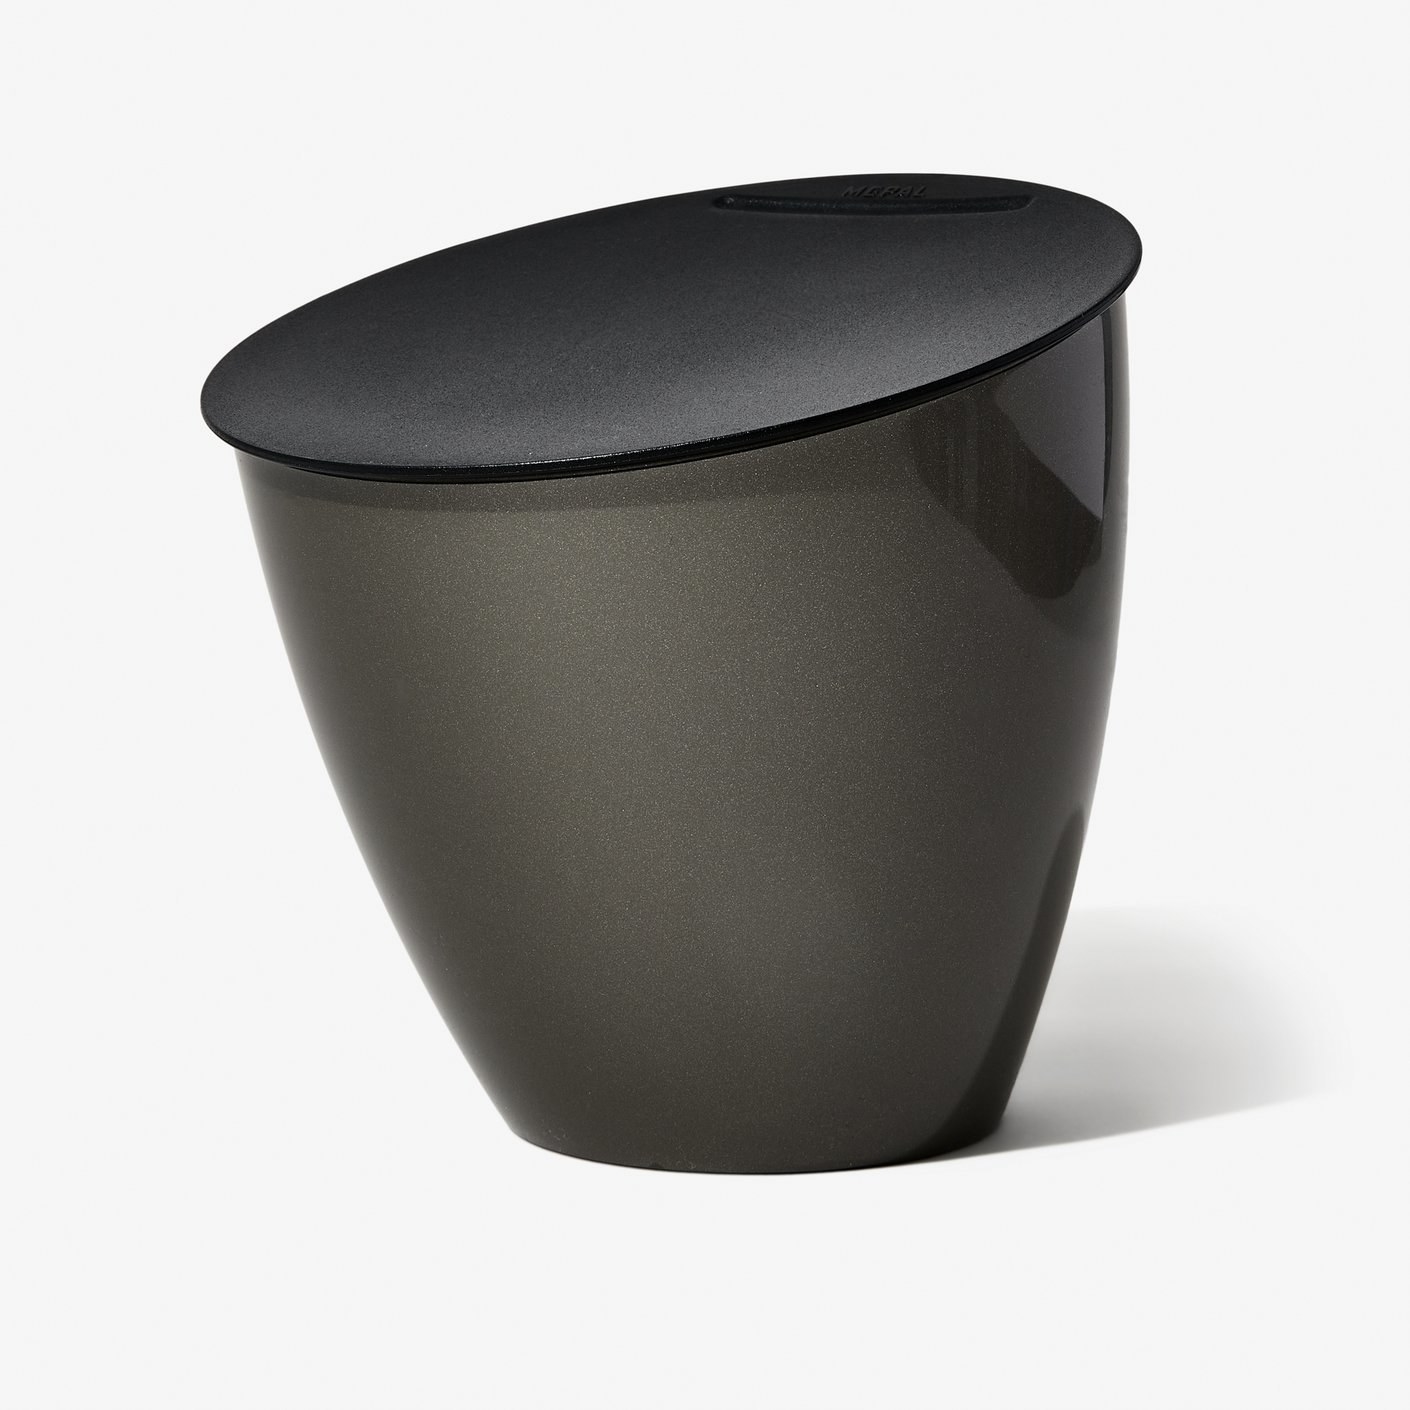 the small black bin with a lid